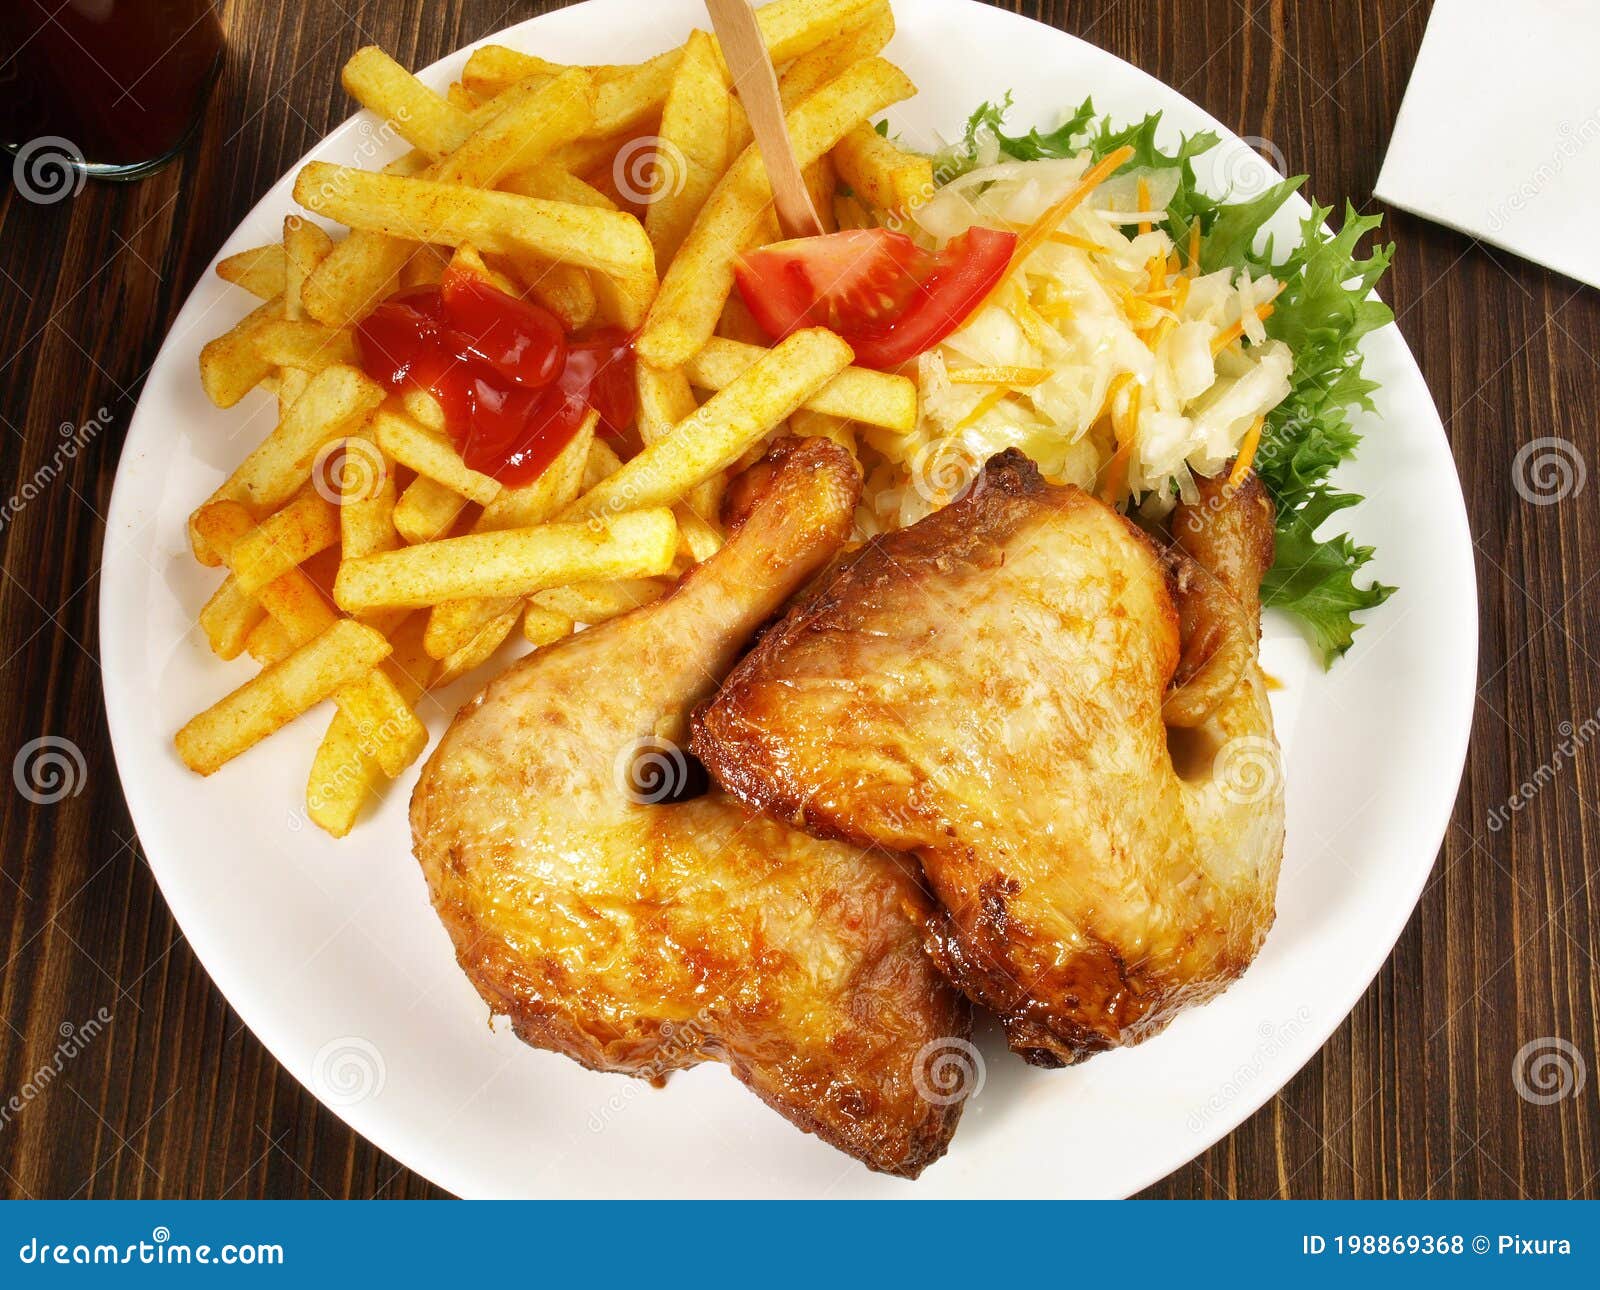 Grilled Chicken Legs with French Fries and Coleslaw Salad Stock Photo ...